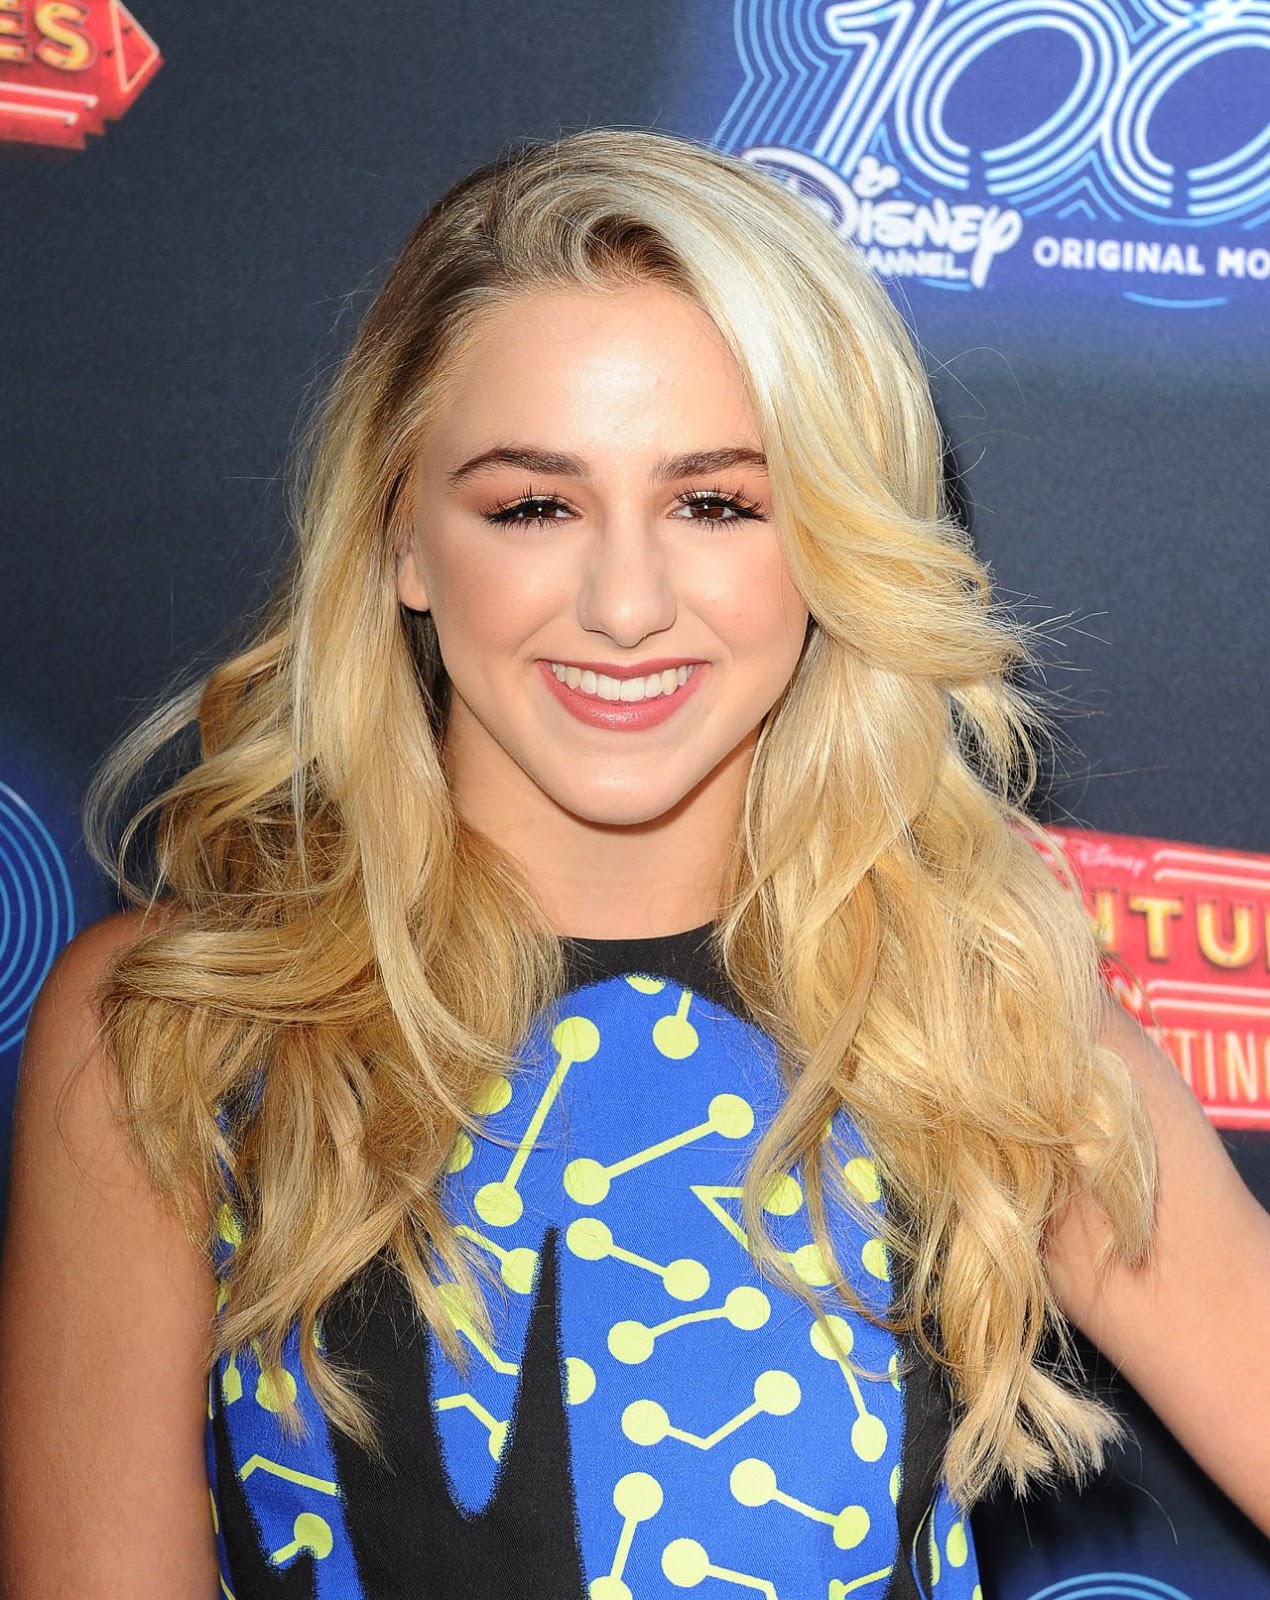 Chloe Elizabeth Lukasiak is an American dancer, television personality, act...